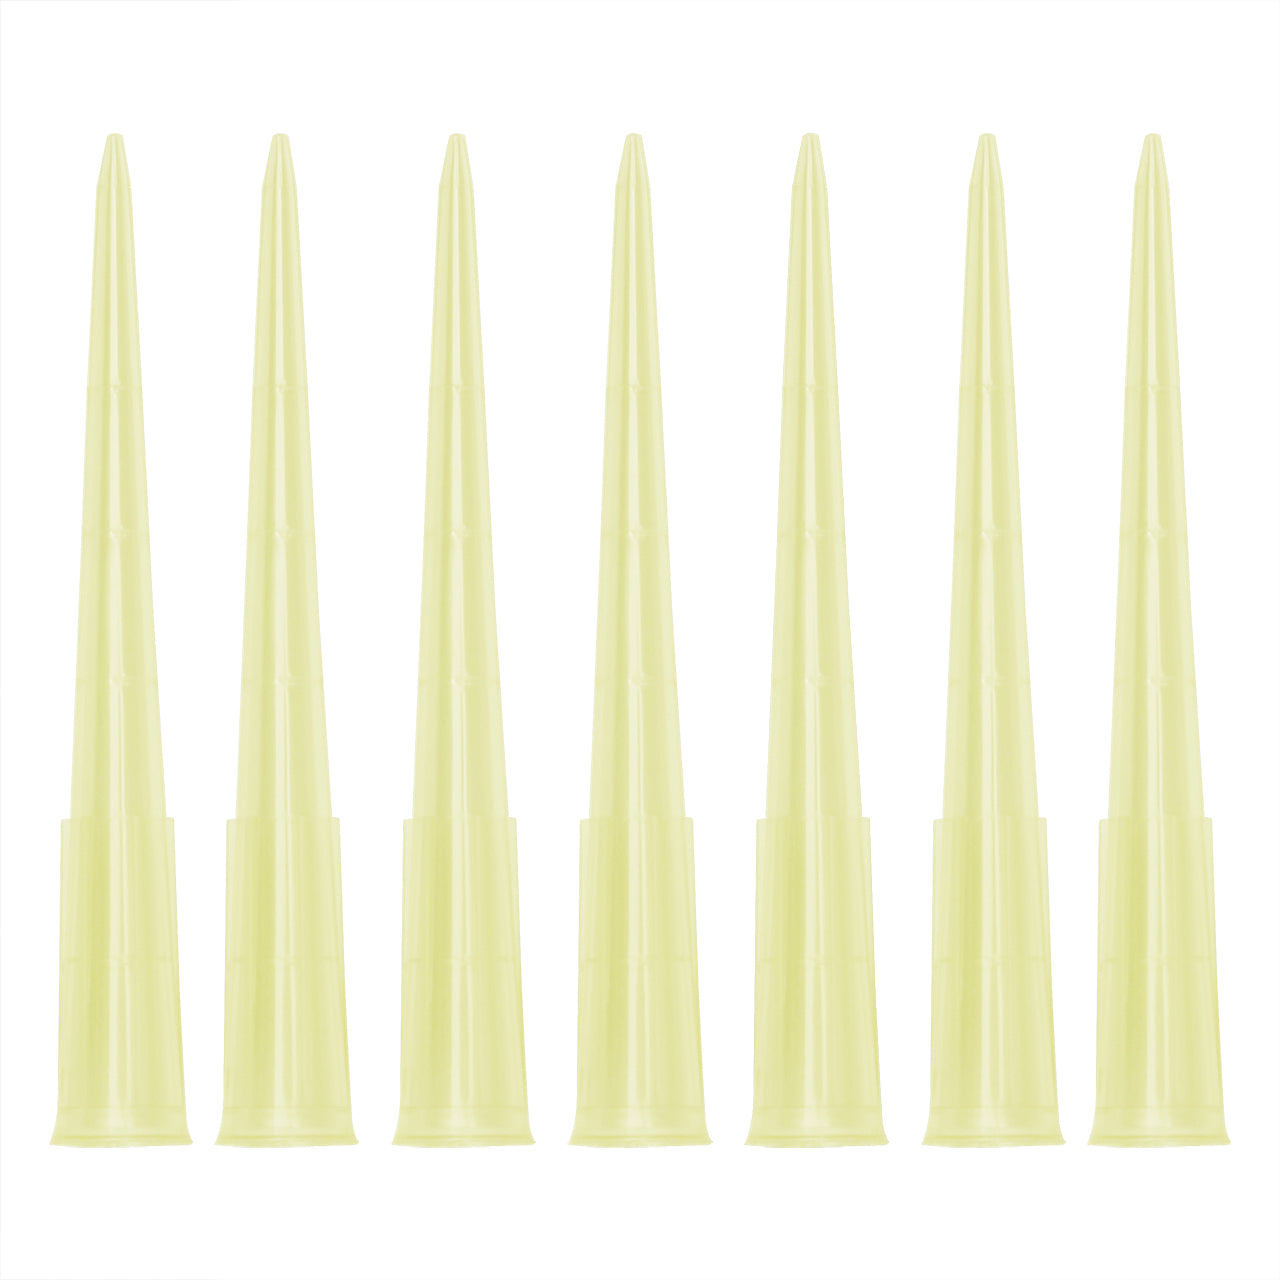 Bulk, Filter Pipette Tips for .1uL - 1250uL Pipettes